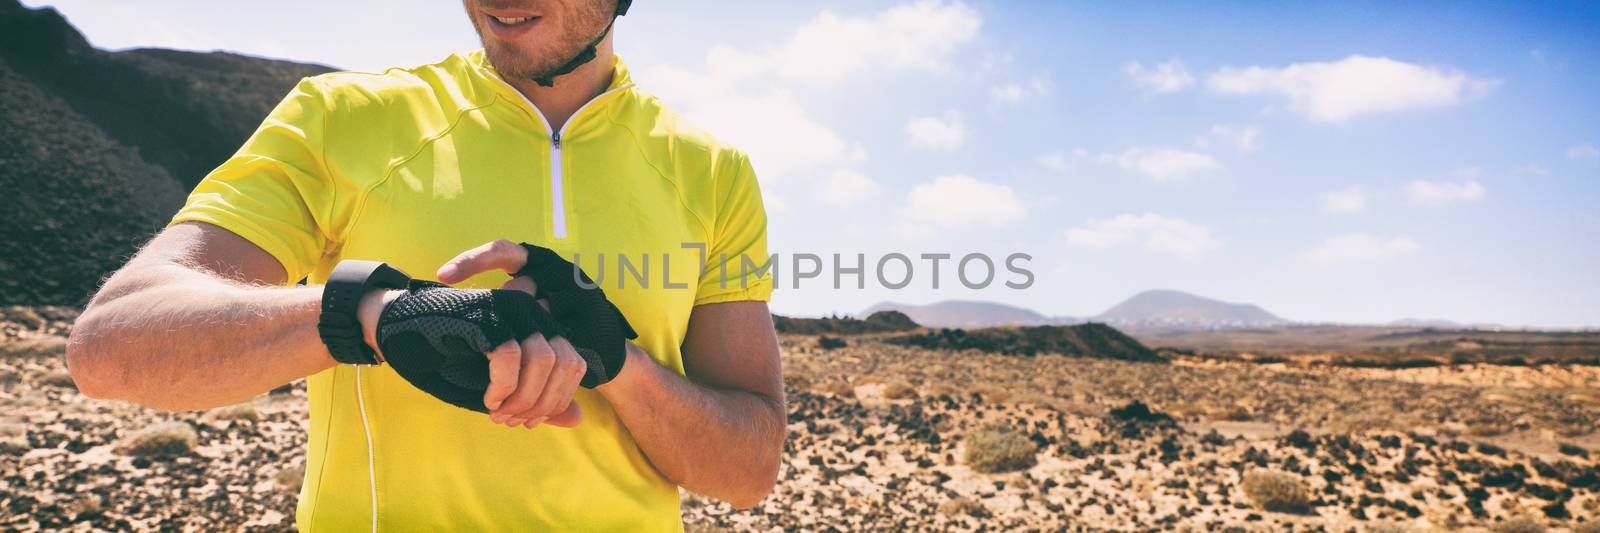 Biking cyclist on mountain bike using wearable tech device smart watch on outdoor training. Panoramic banner man athlete active lifestyle.